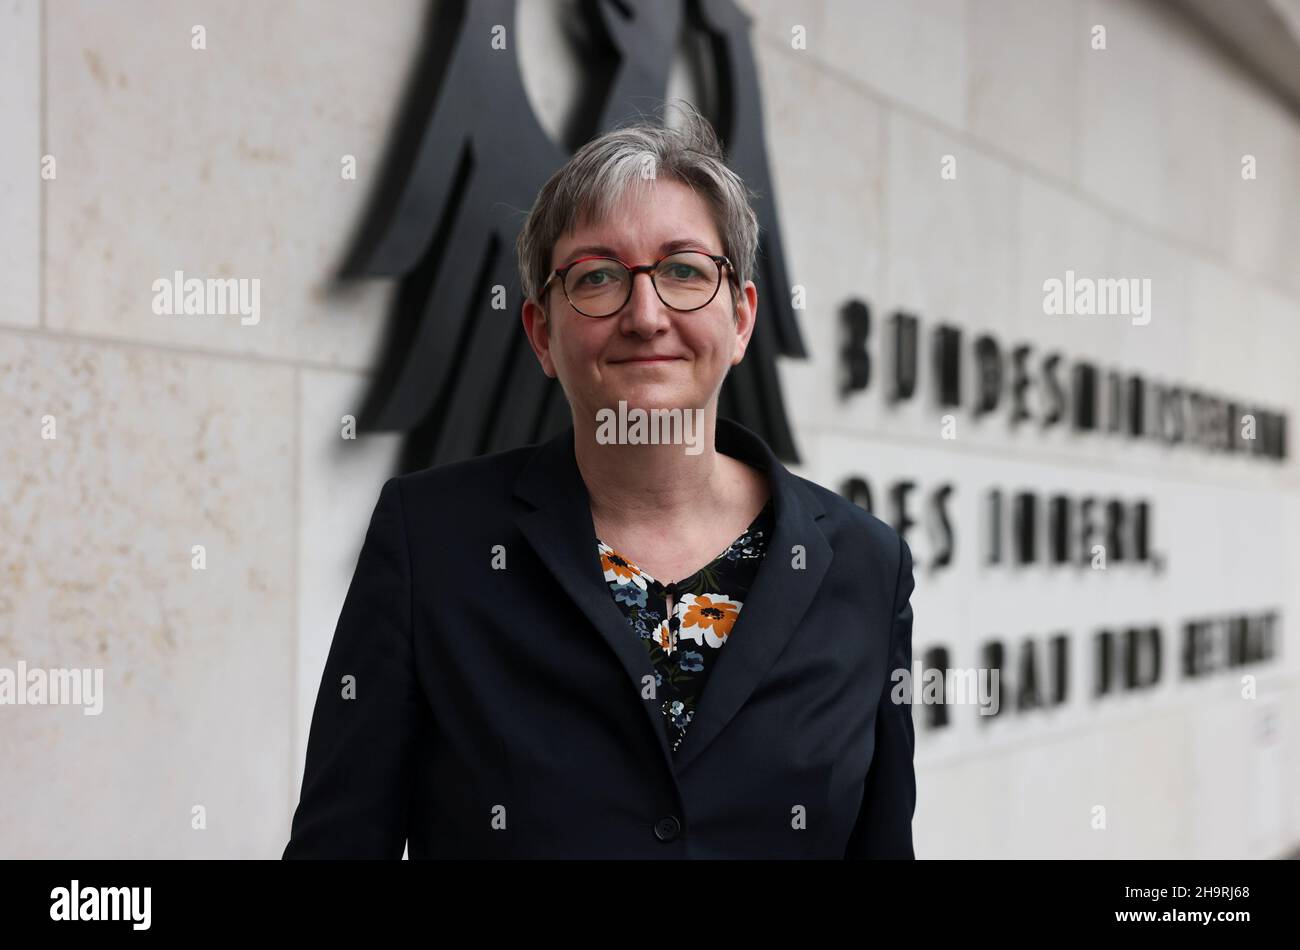 New German Housing Minister Klara Geywitz poses for a picture during a handover ceremony in Berlin, Germany, December 8, 2021. REUTERS/Christian Mang Stock Photo